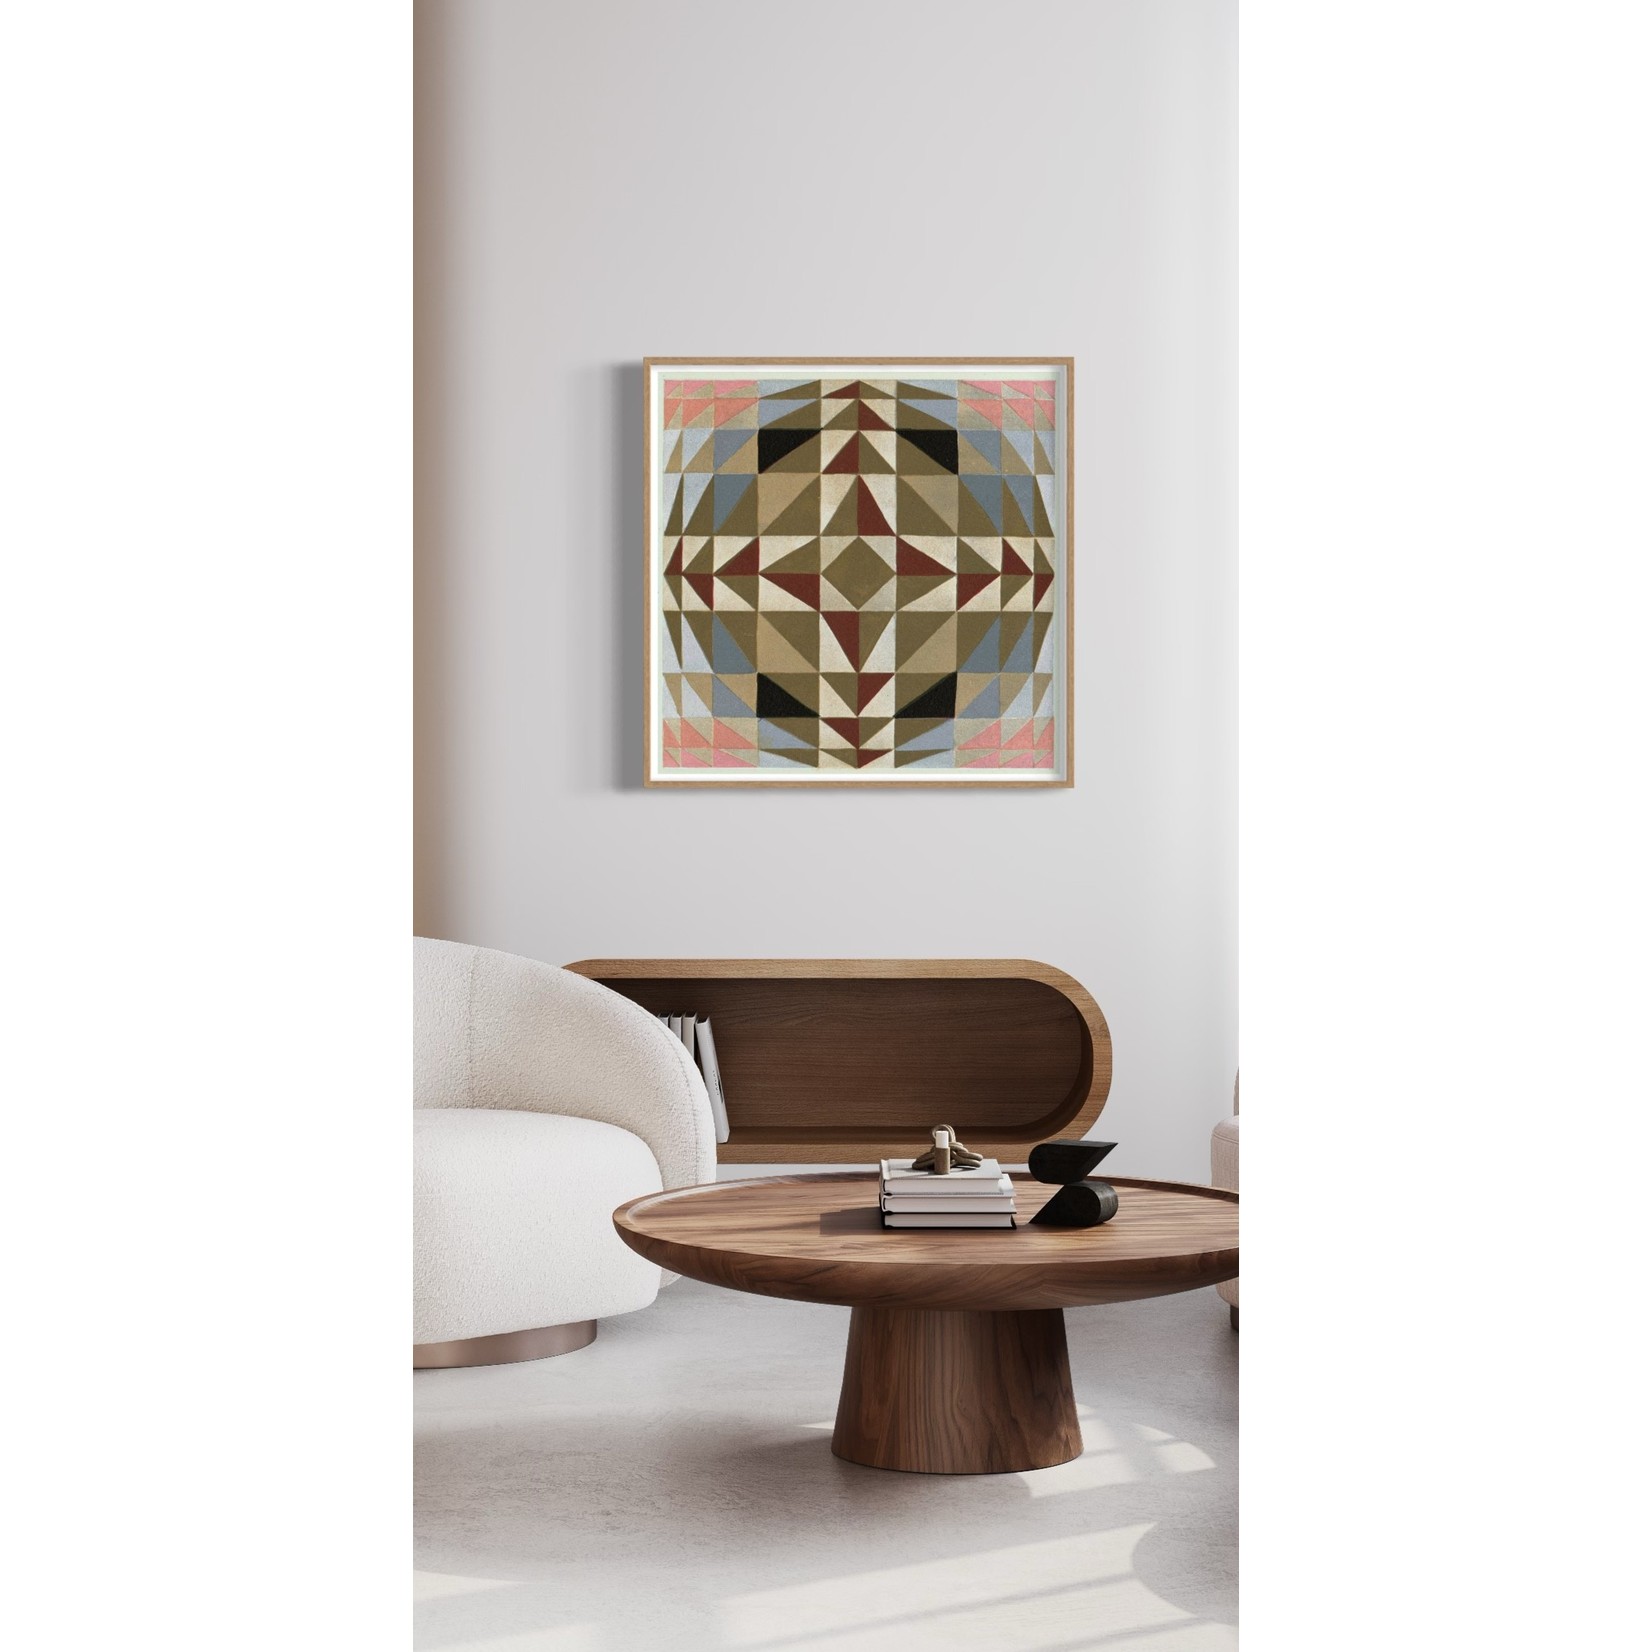 Fine Art Print on Rag Paper Sphere on Nouvelles Variations by Edouard Benedictus